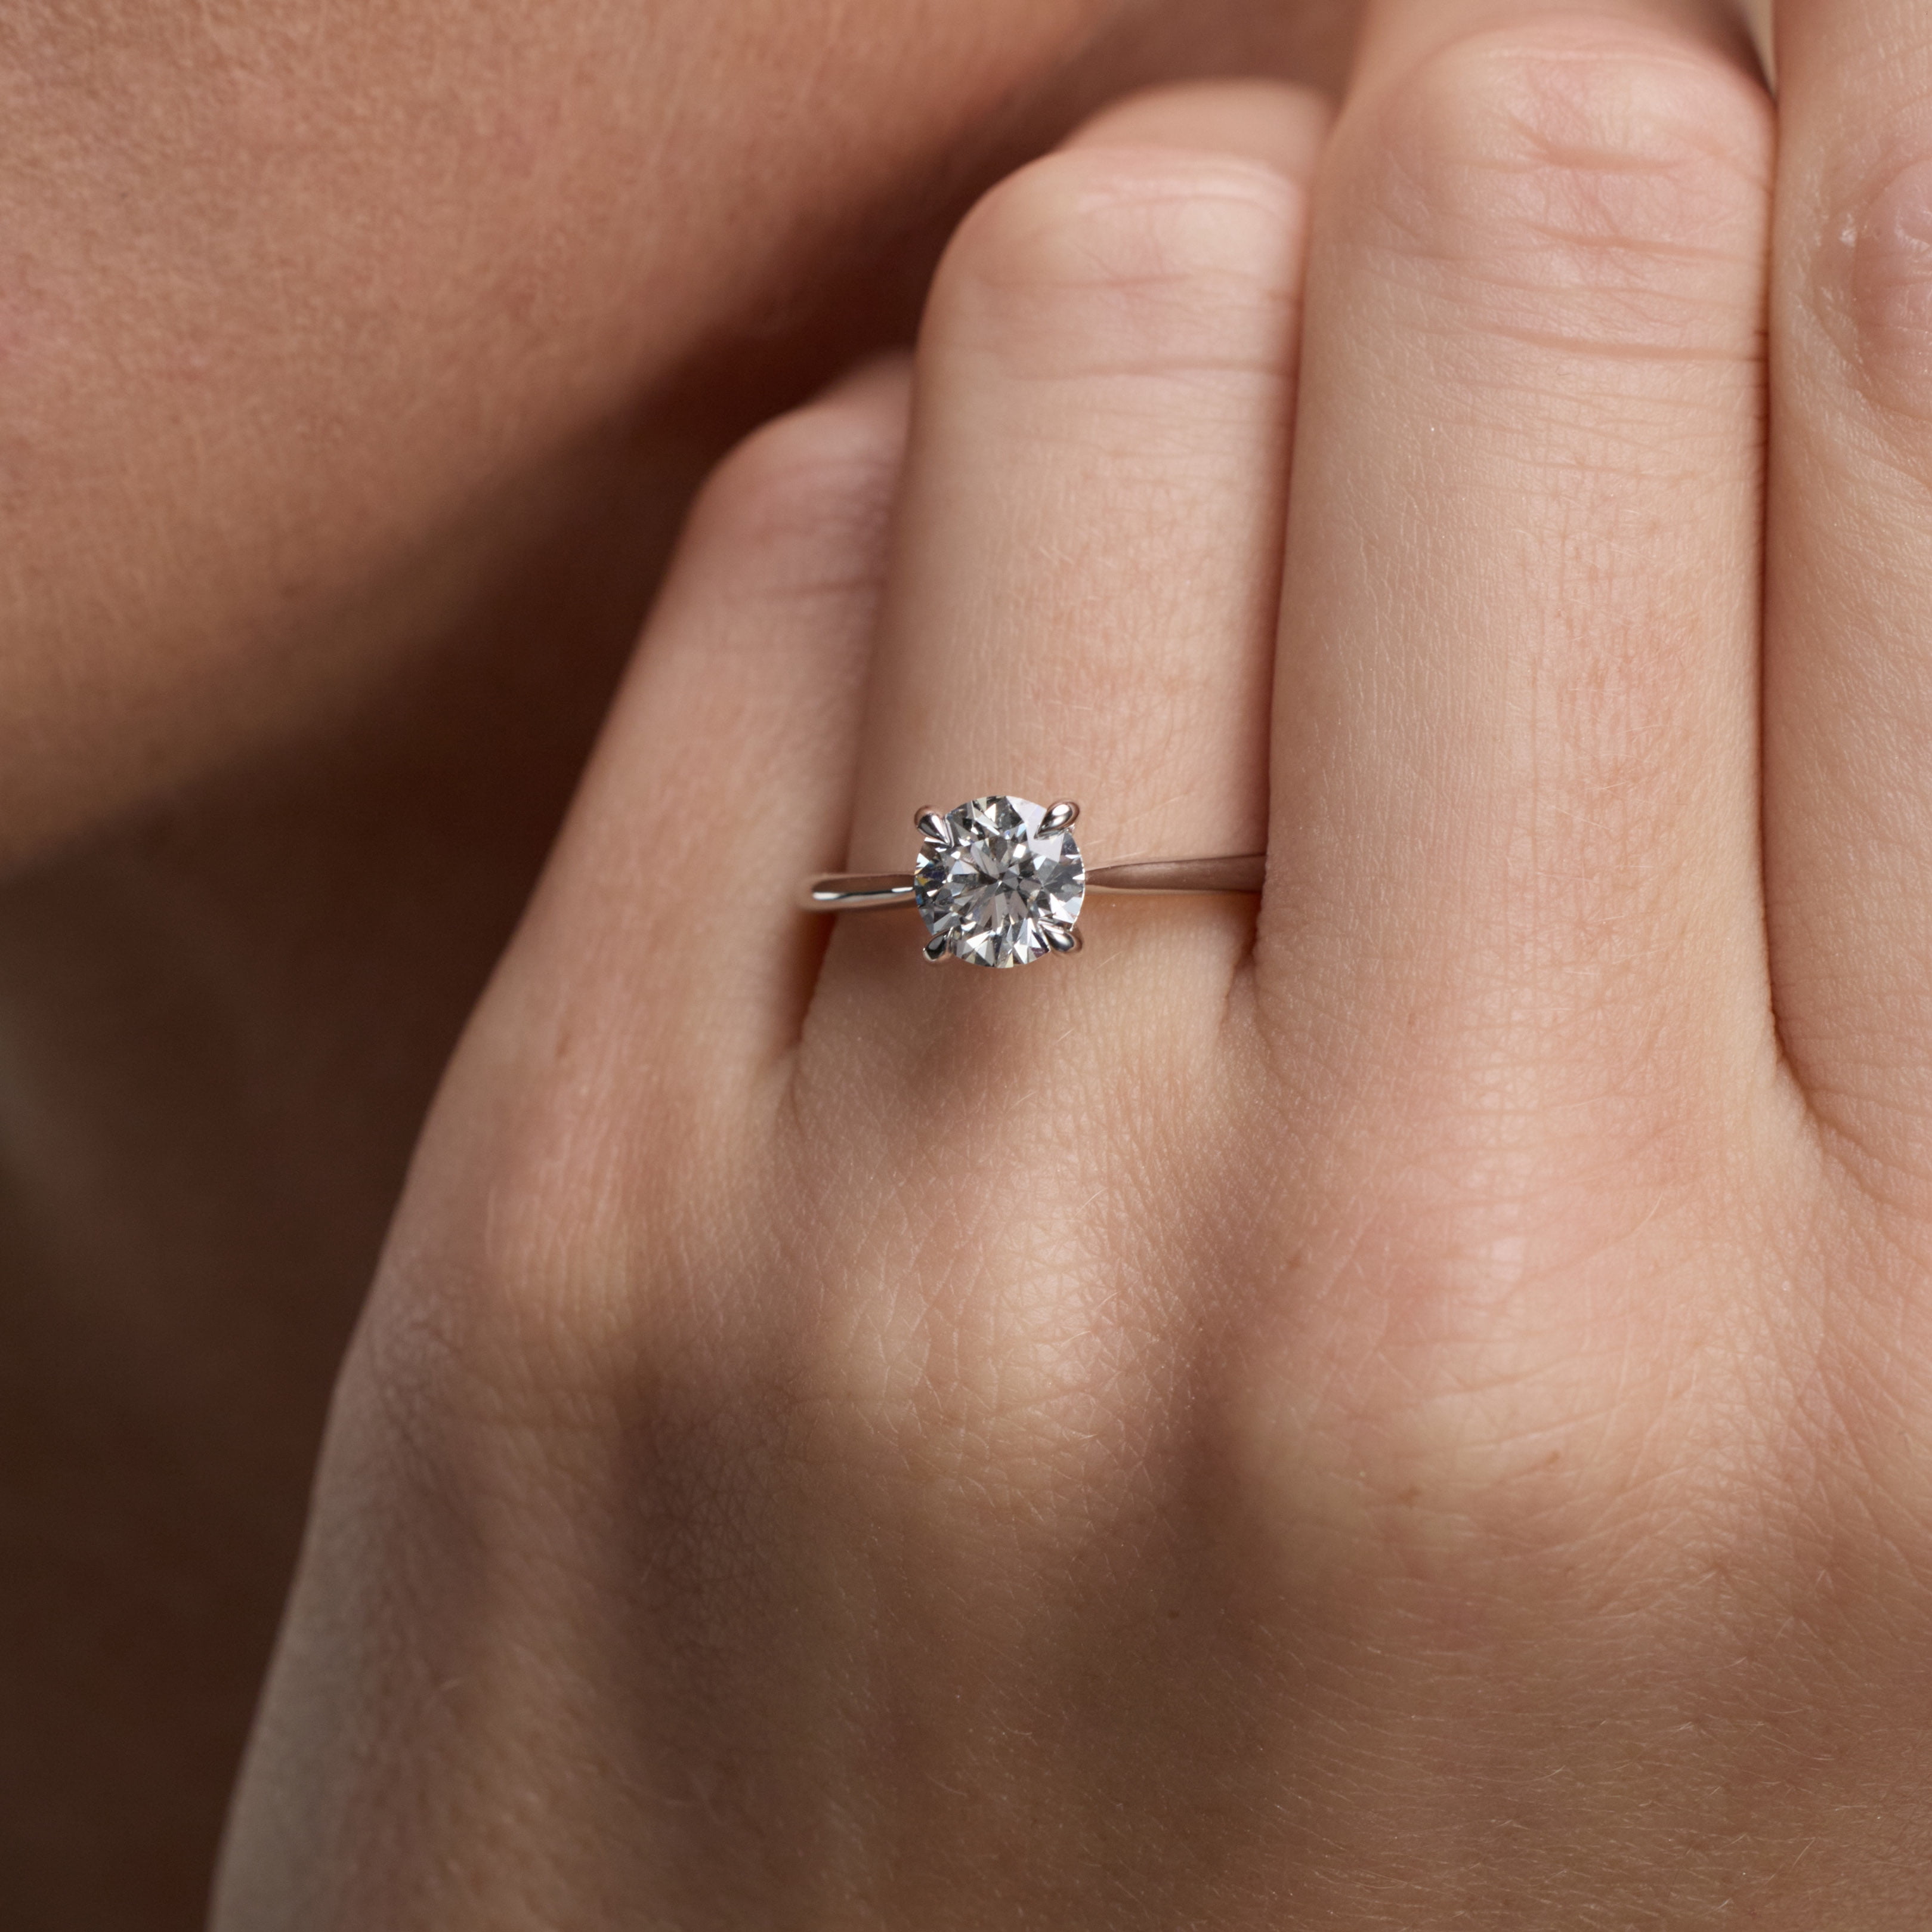 Four Prong or Six Prong Engagement Rings? Whiteflash